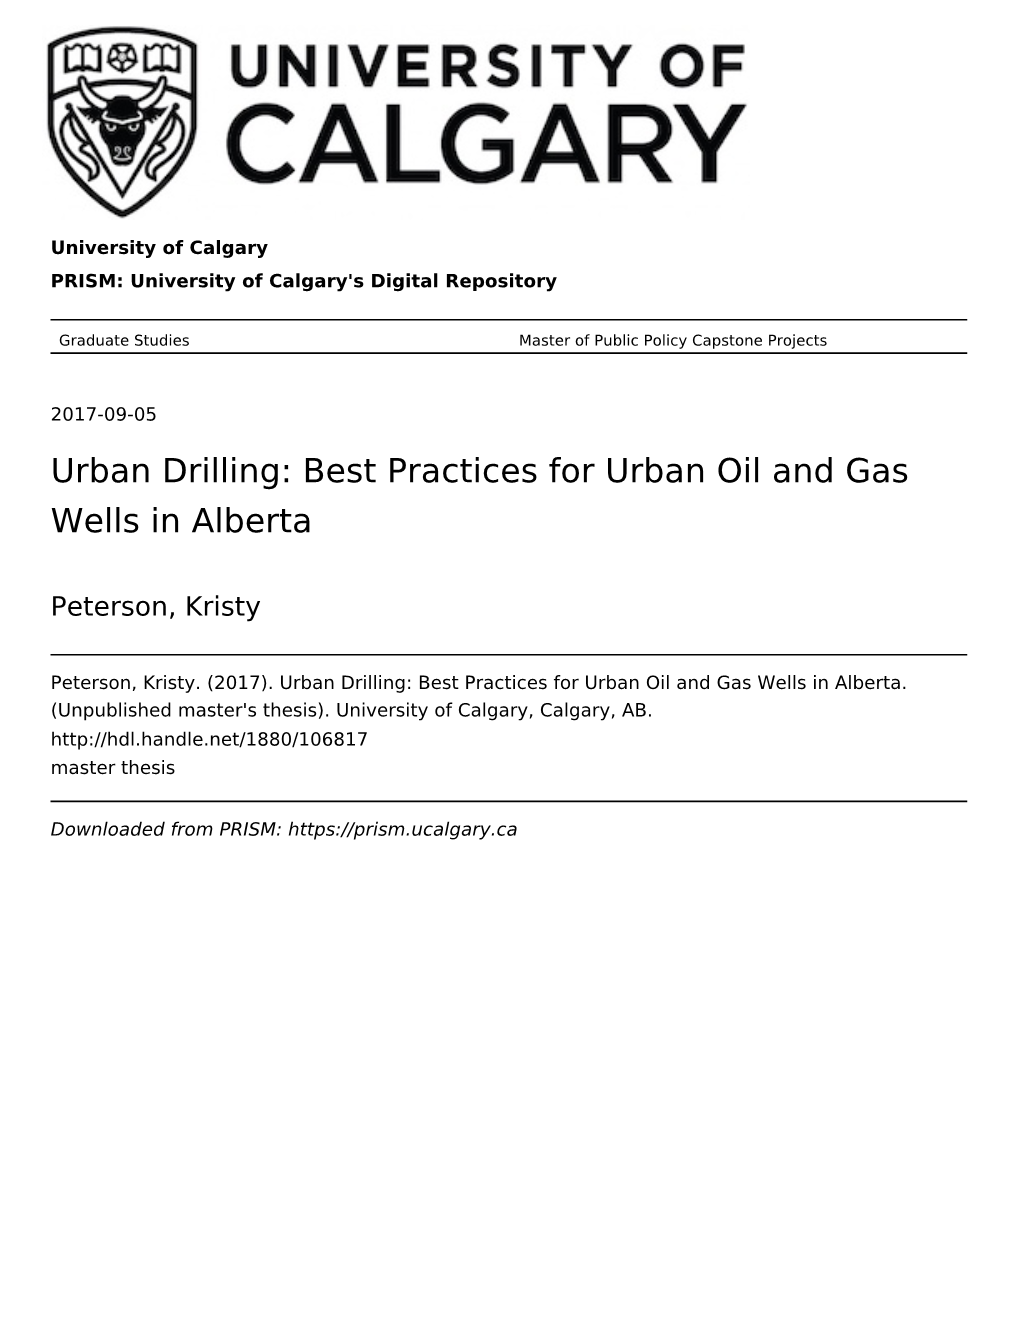 Best Practices for Urban Oil and Gas Wells in Alberta